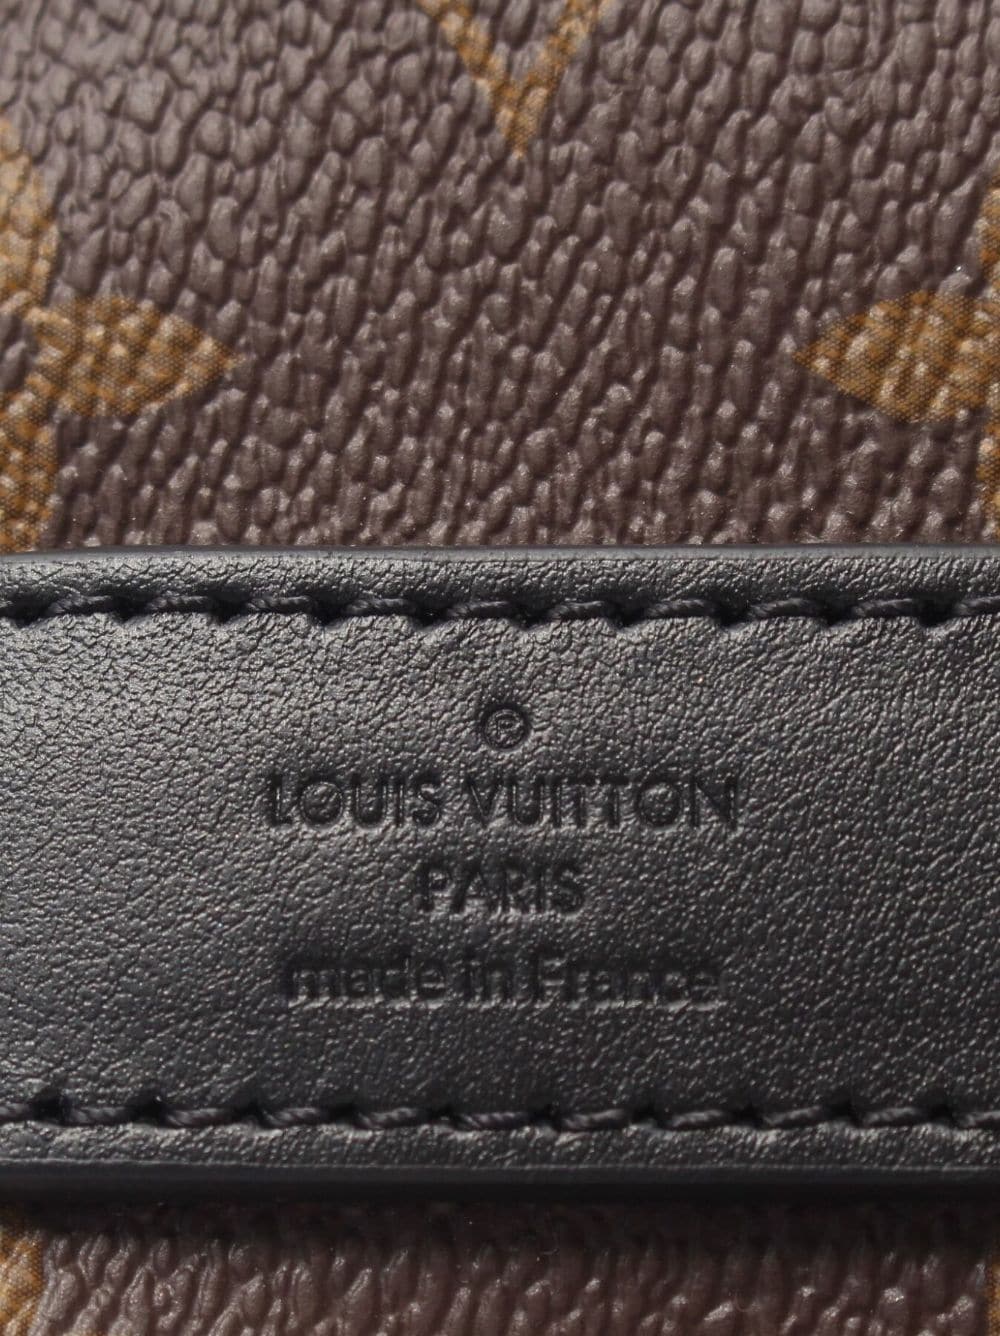 louis vuitton where is it made